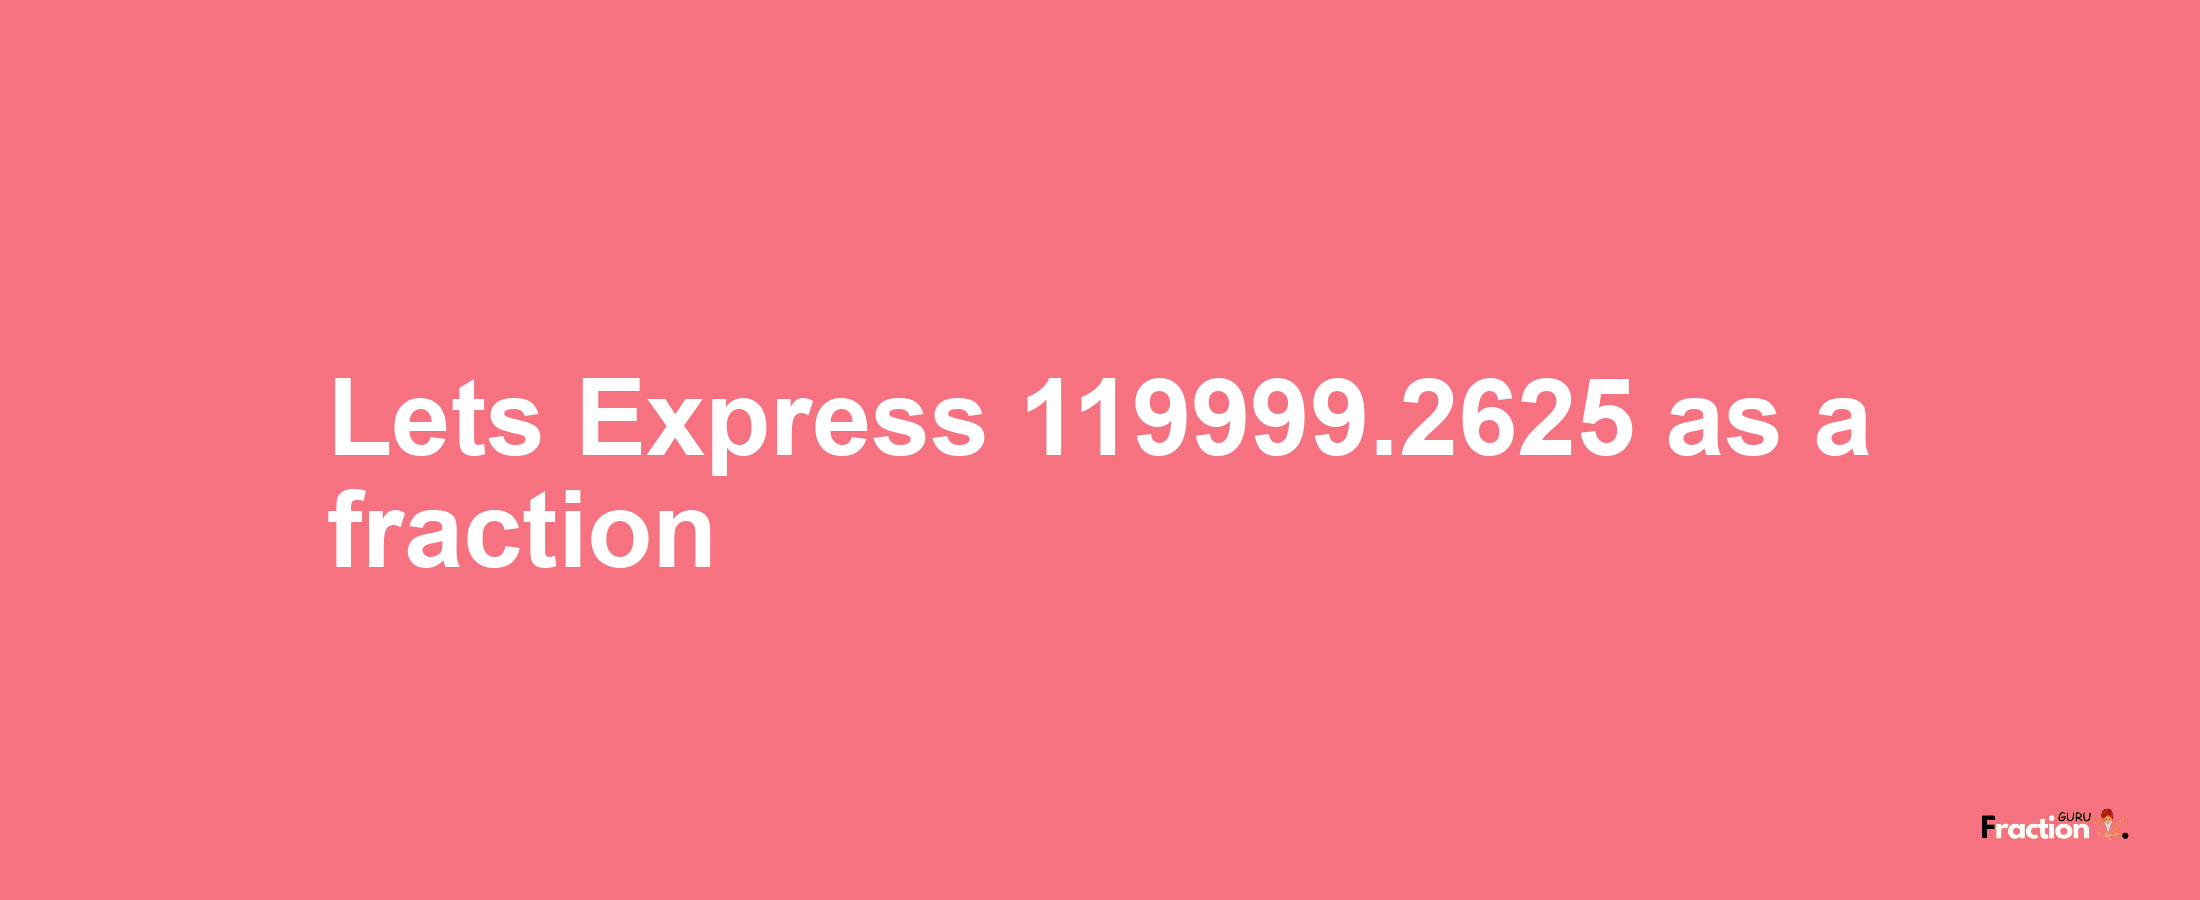 Lets Express 119999.2625 as afraction